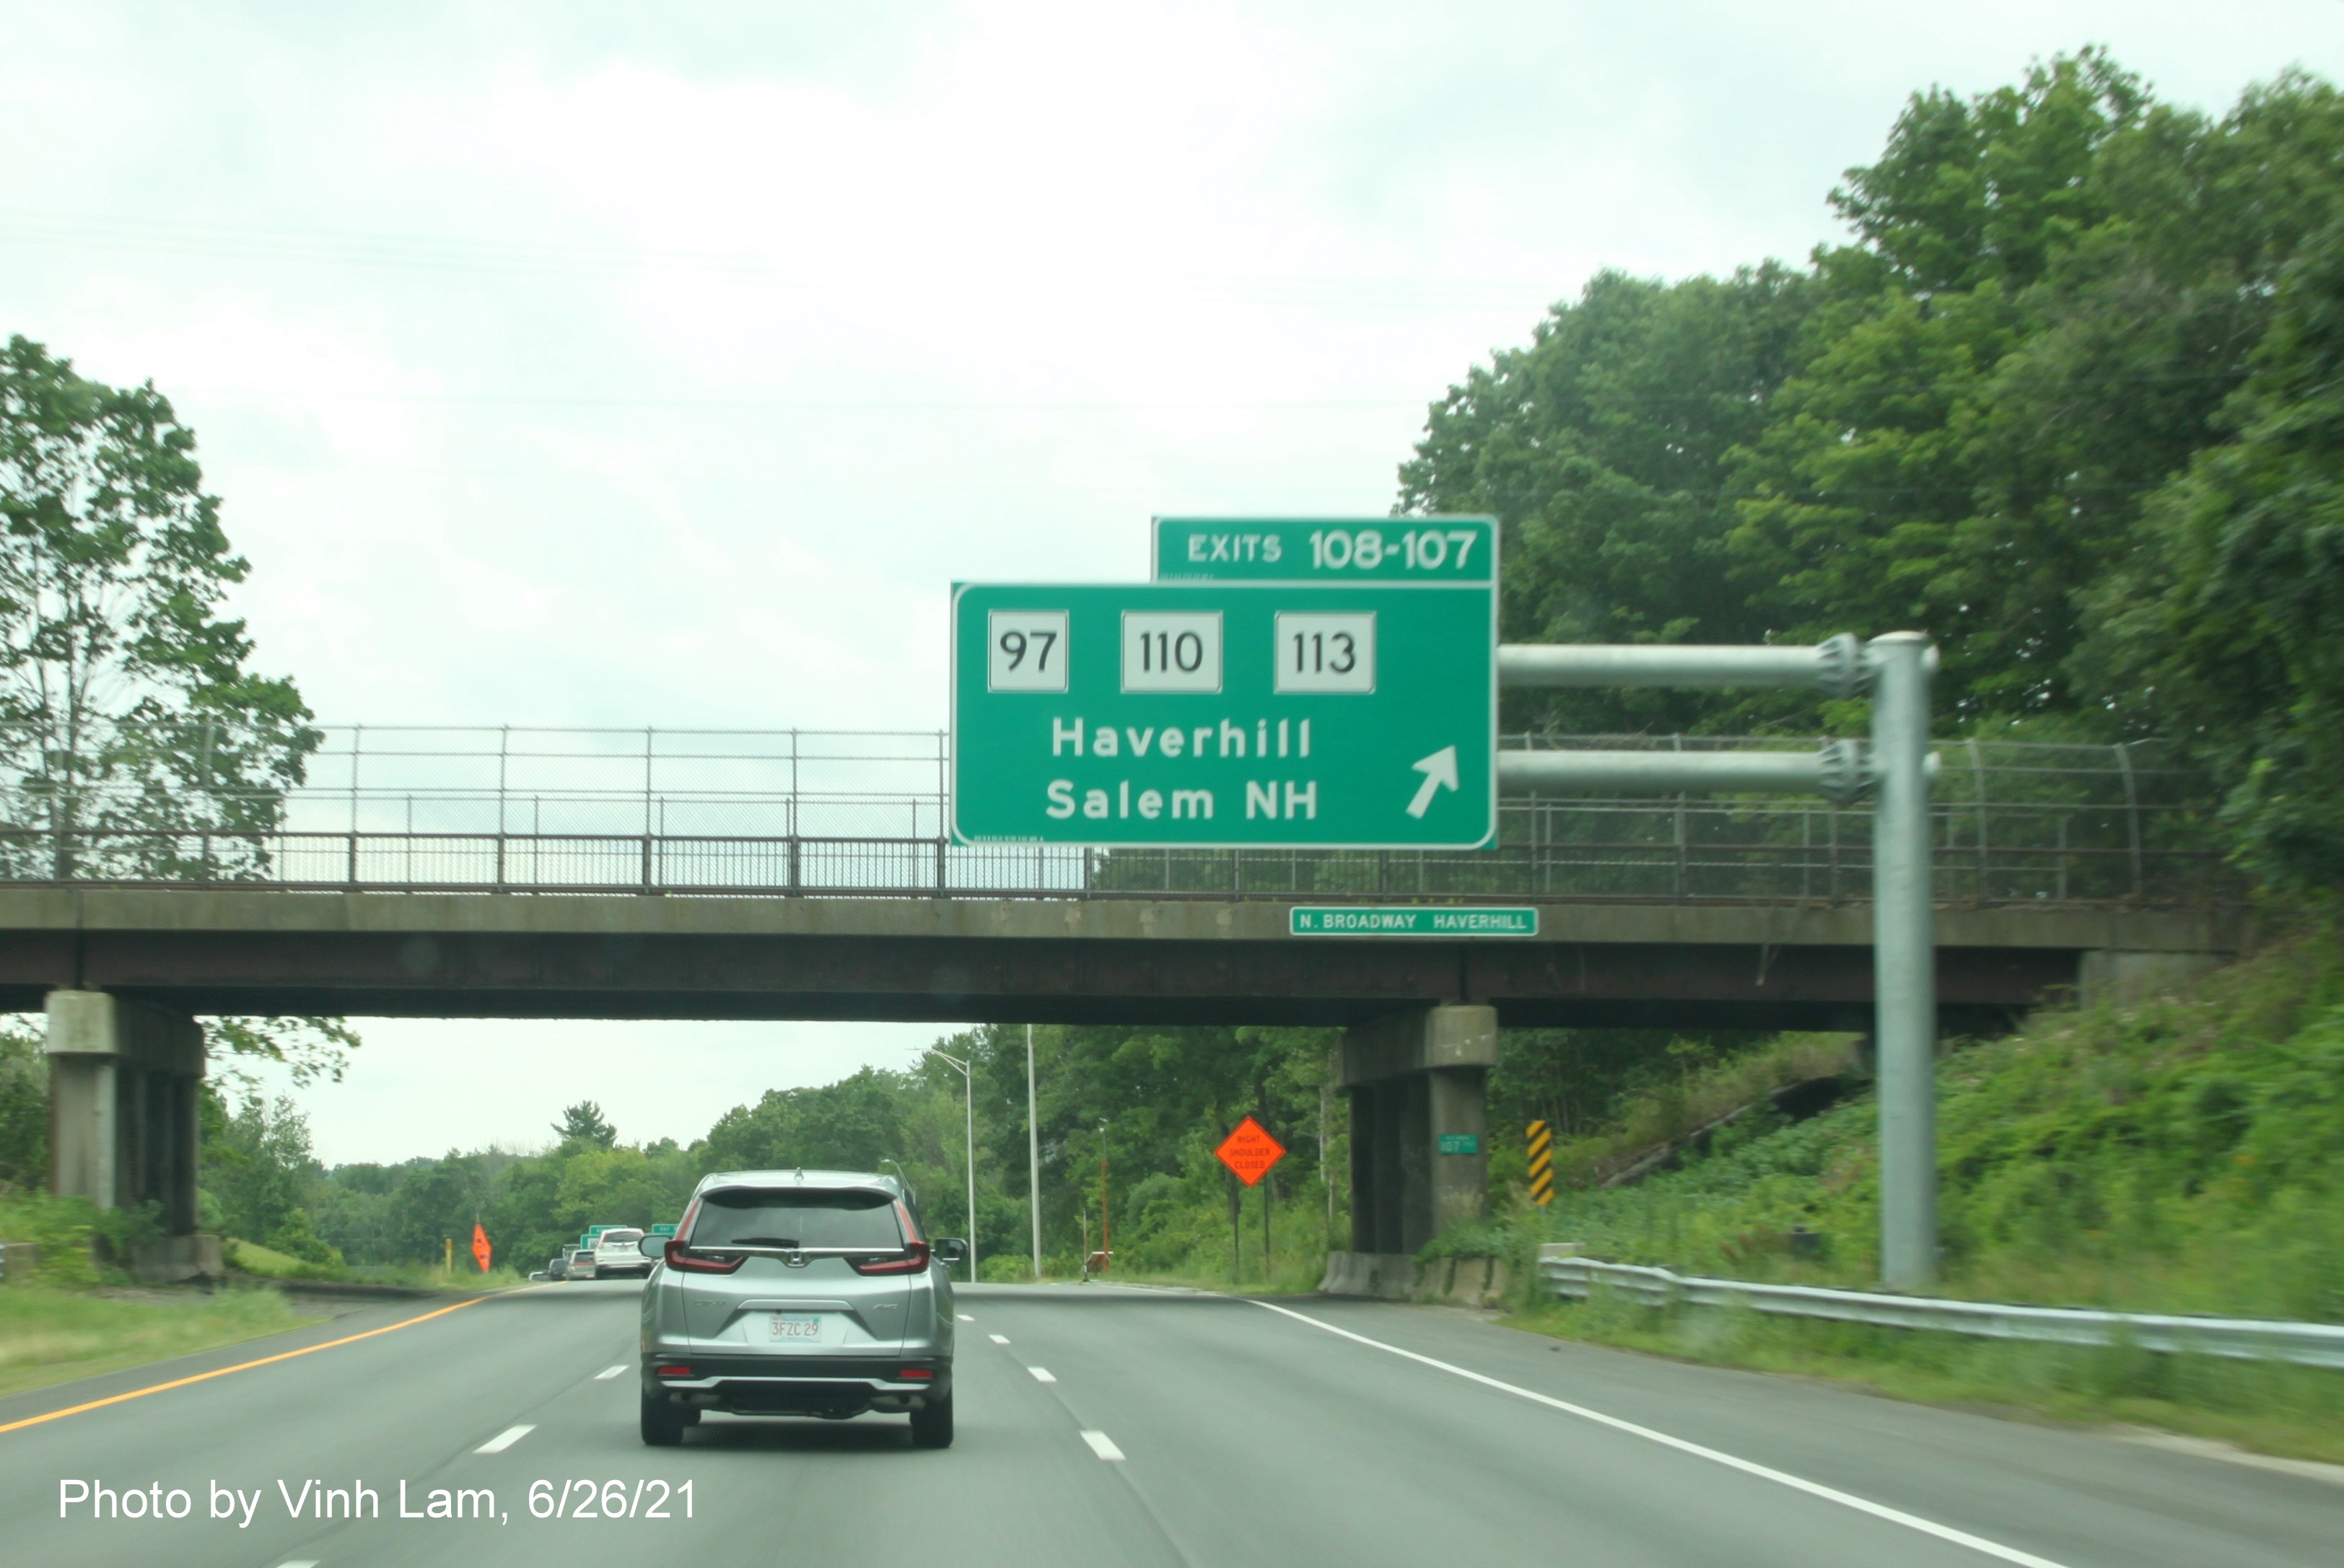 Image of overhead ramp sign for C/D lanes for MA 97 and MA 110/113 exits with new milepost based exit numbers on I-495 South in Haverhill, photo by Vinh Lam, June 2021